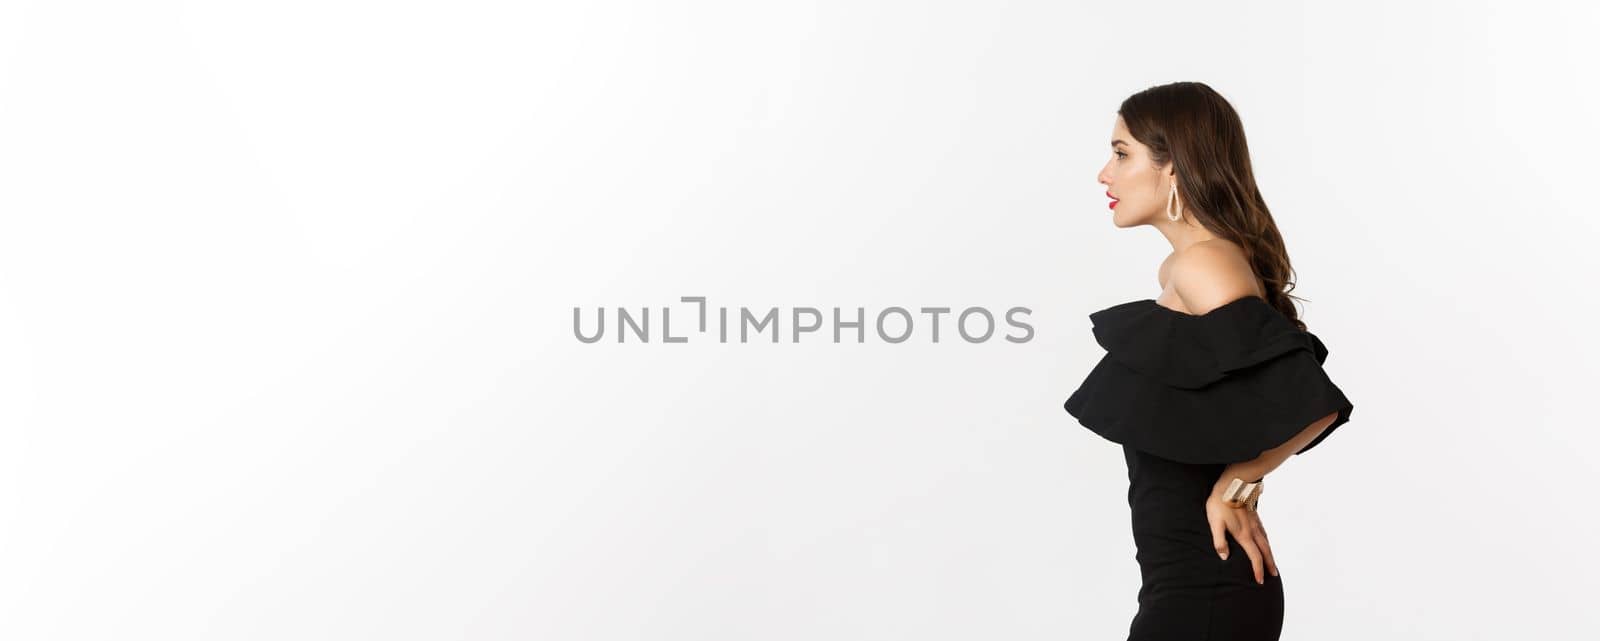 Profile view of beautiful woman in elegant black dress, standing over white background. Copy space